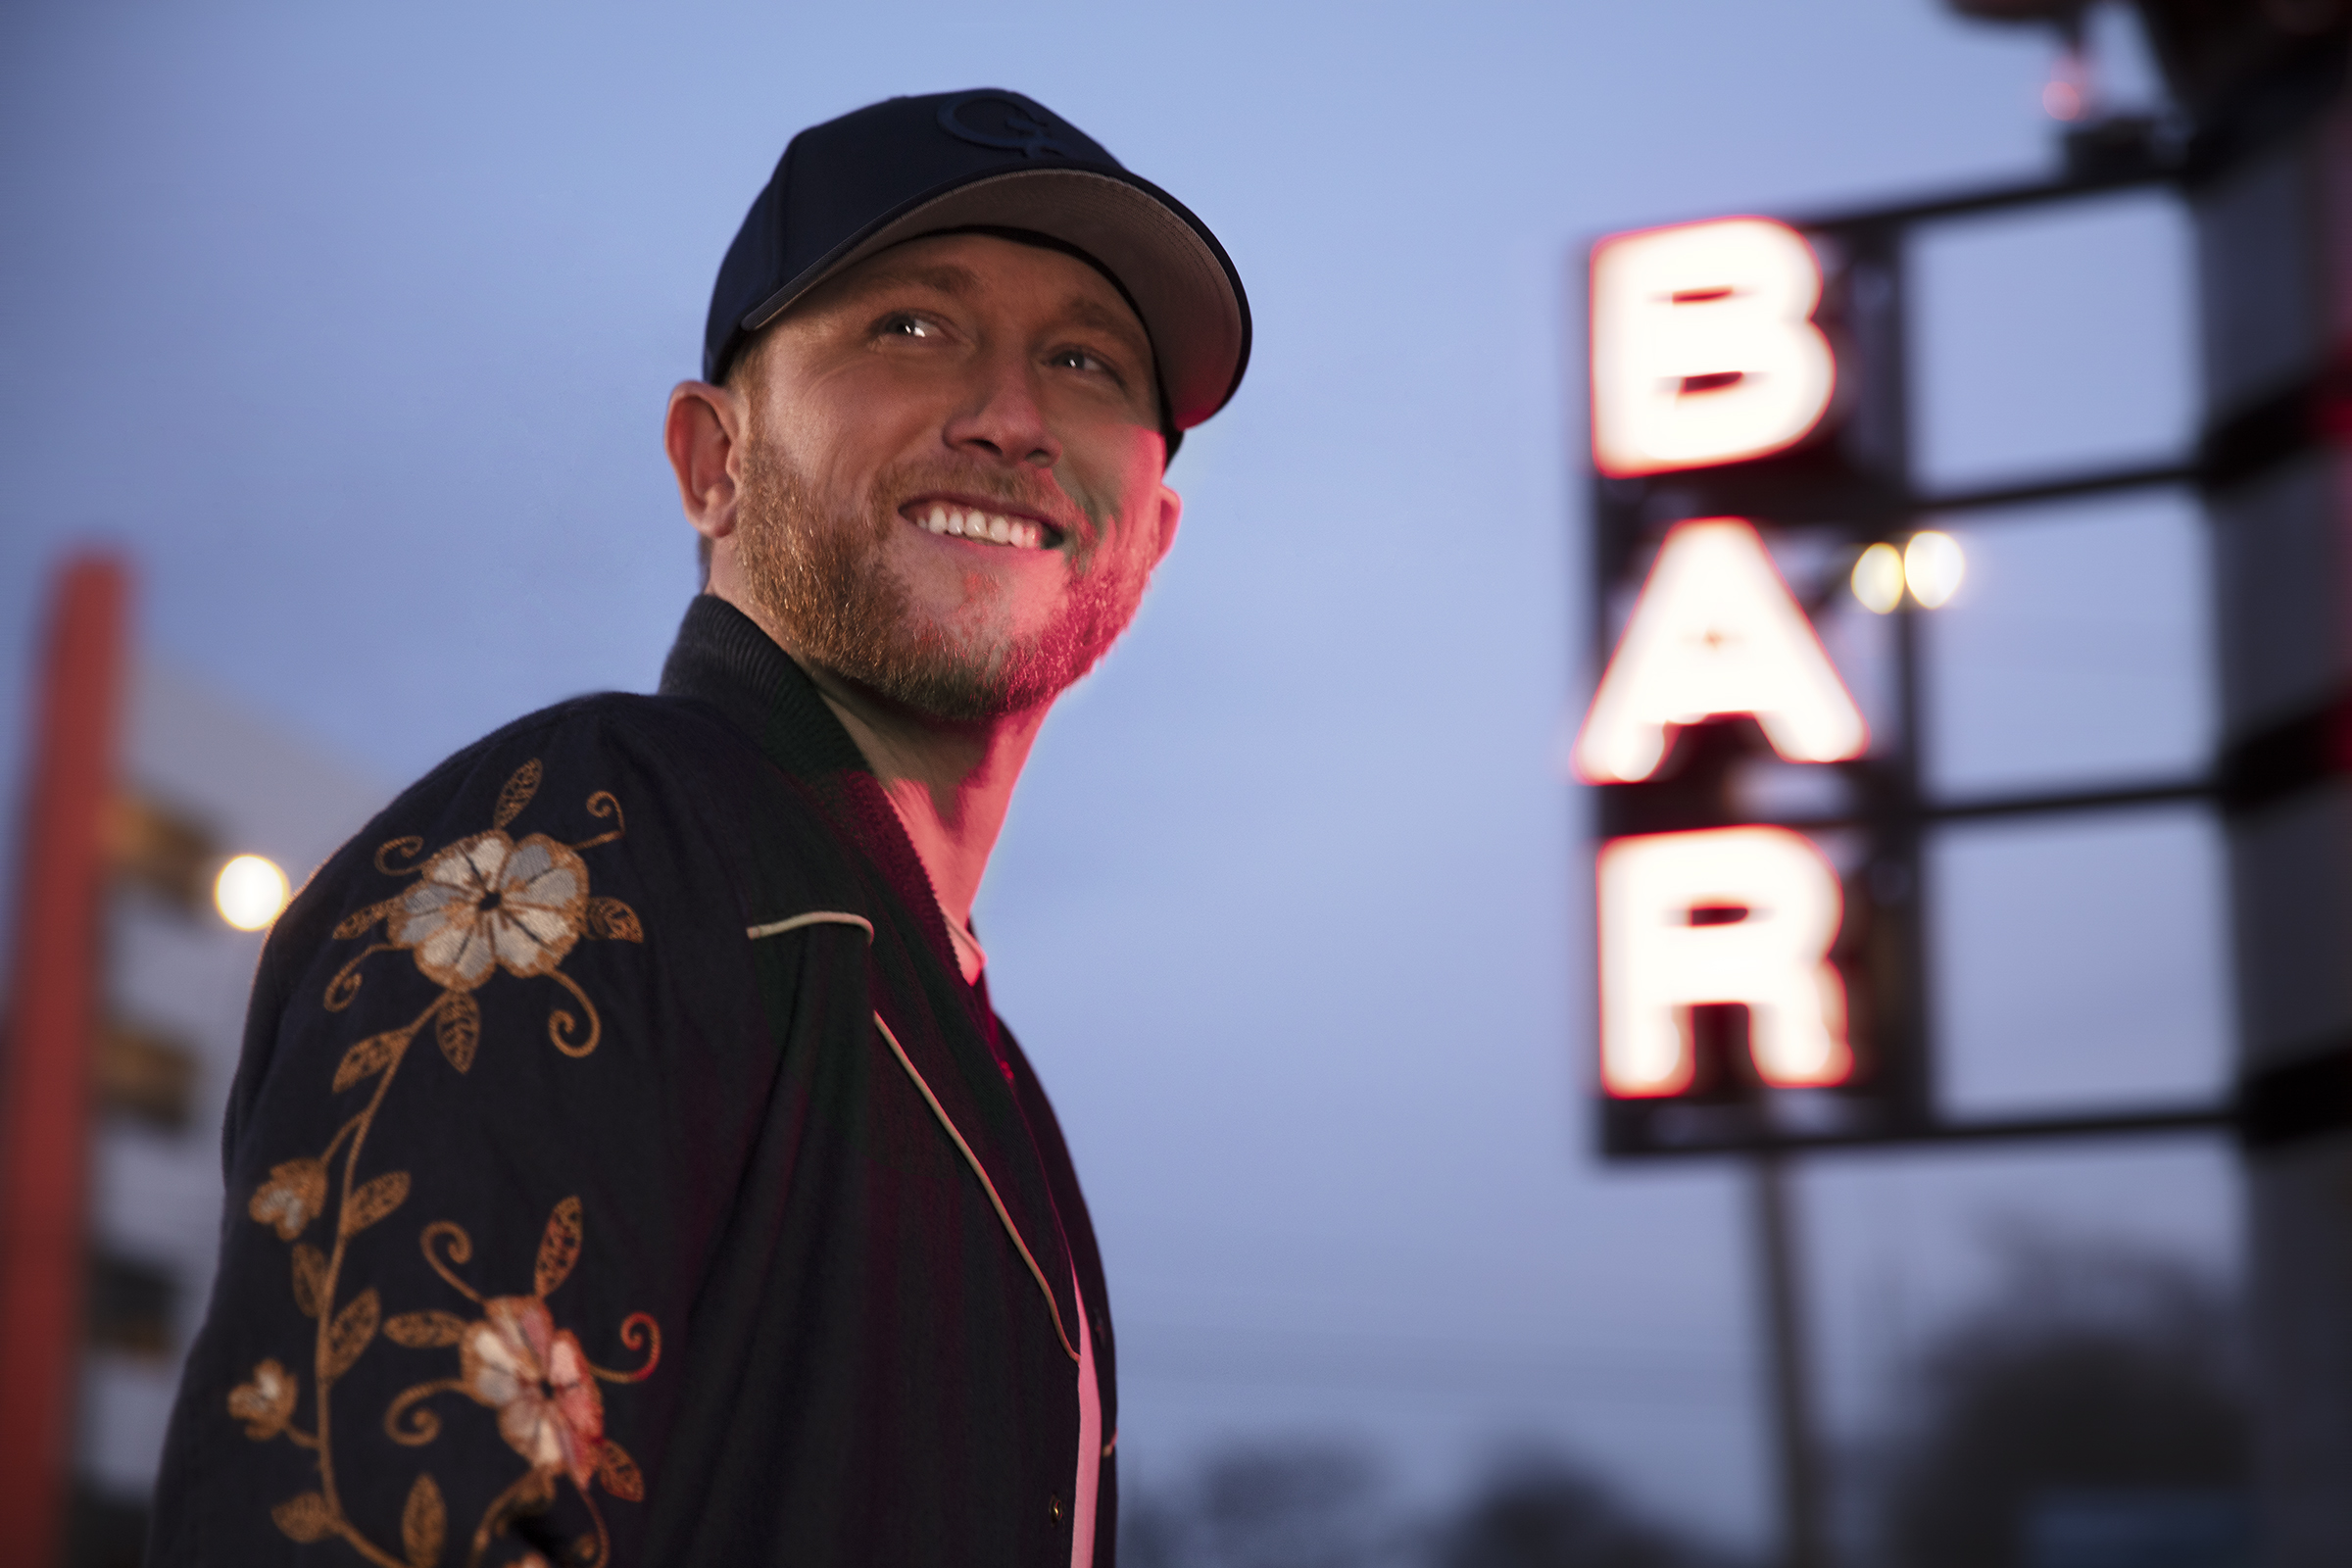 New Music Friday: Cole Swindell Kicks Off Summer with “Single Saturday Night” & More